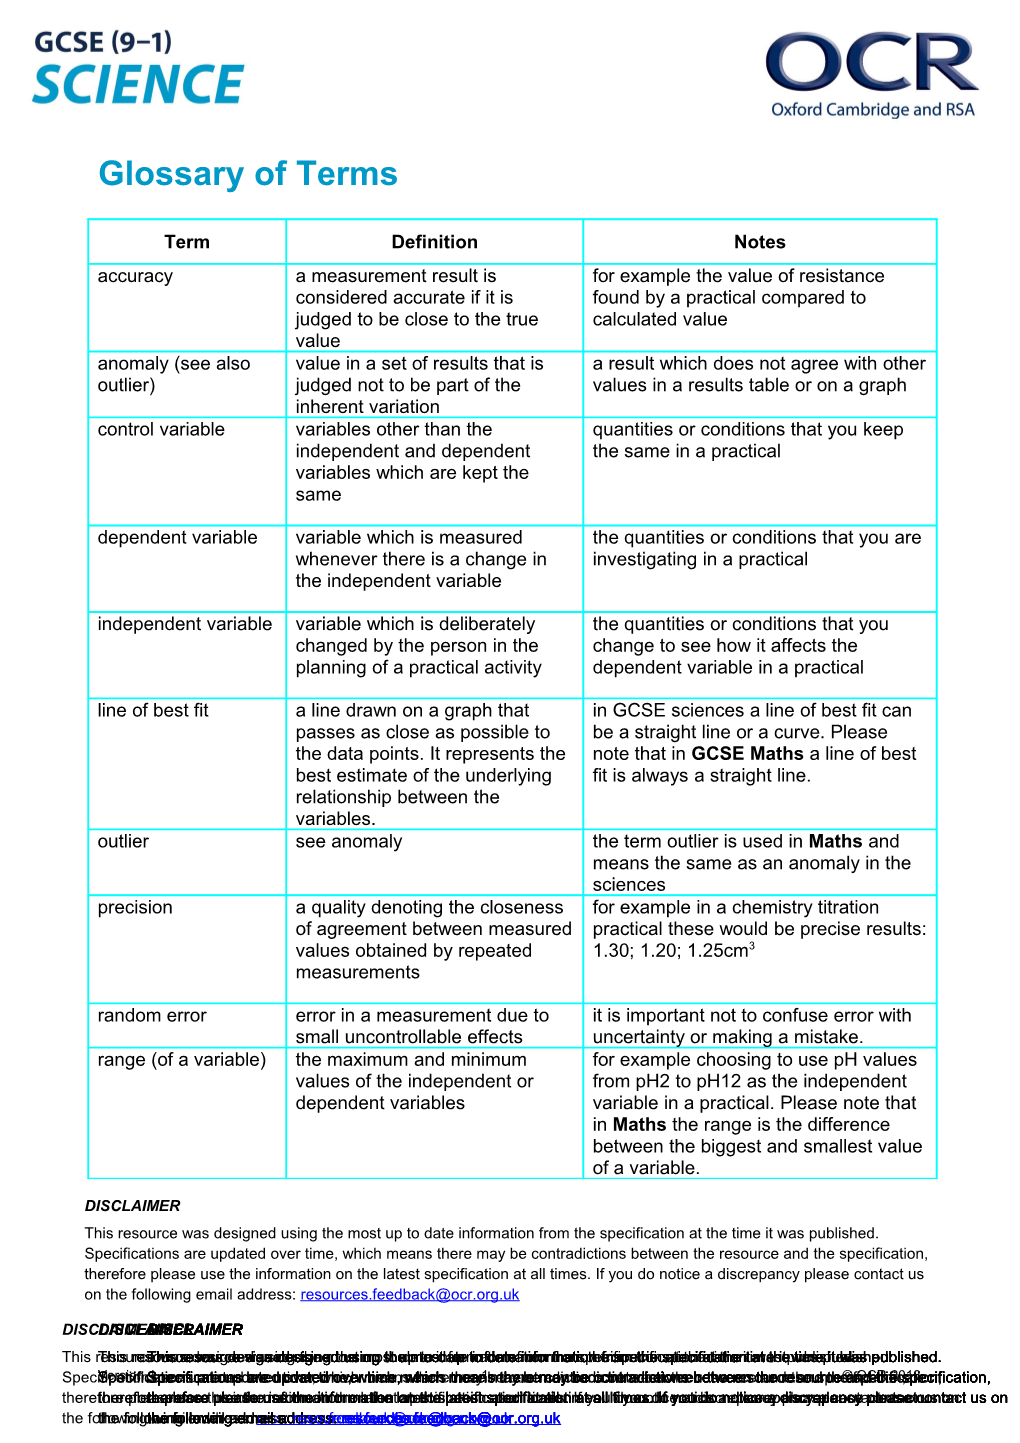 OCR GCSE (9-1) Science Glossary of Terms